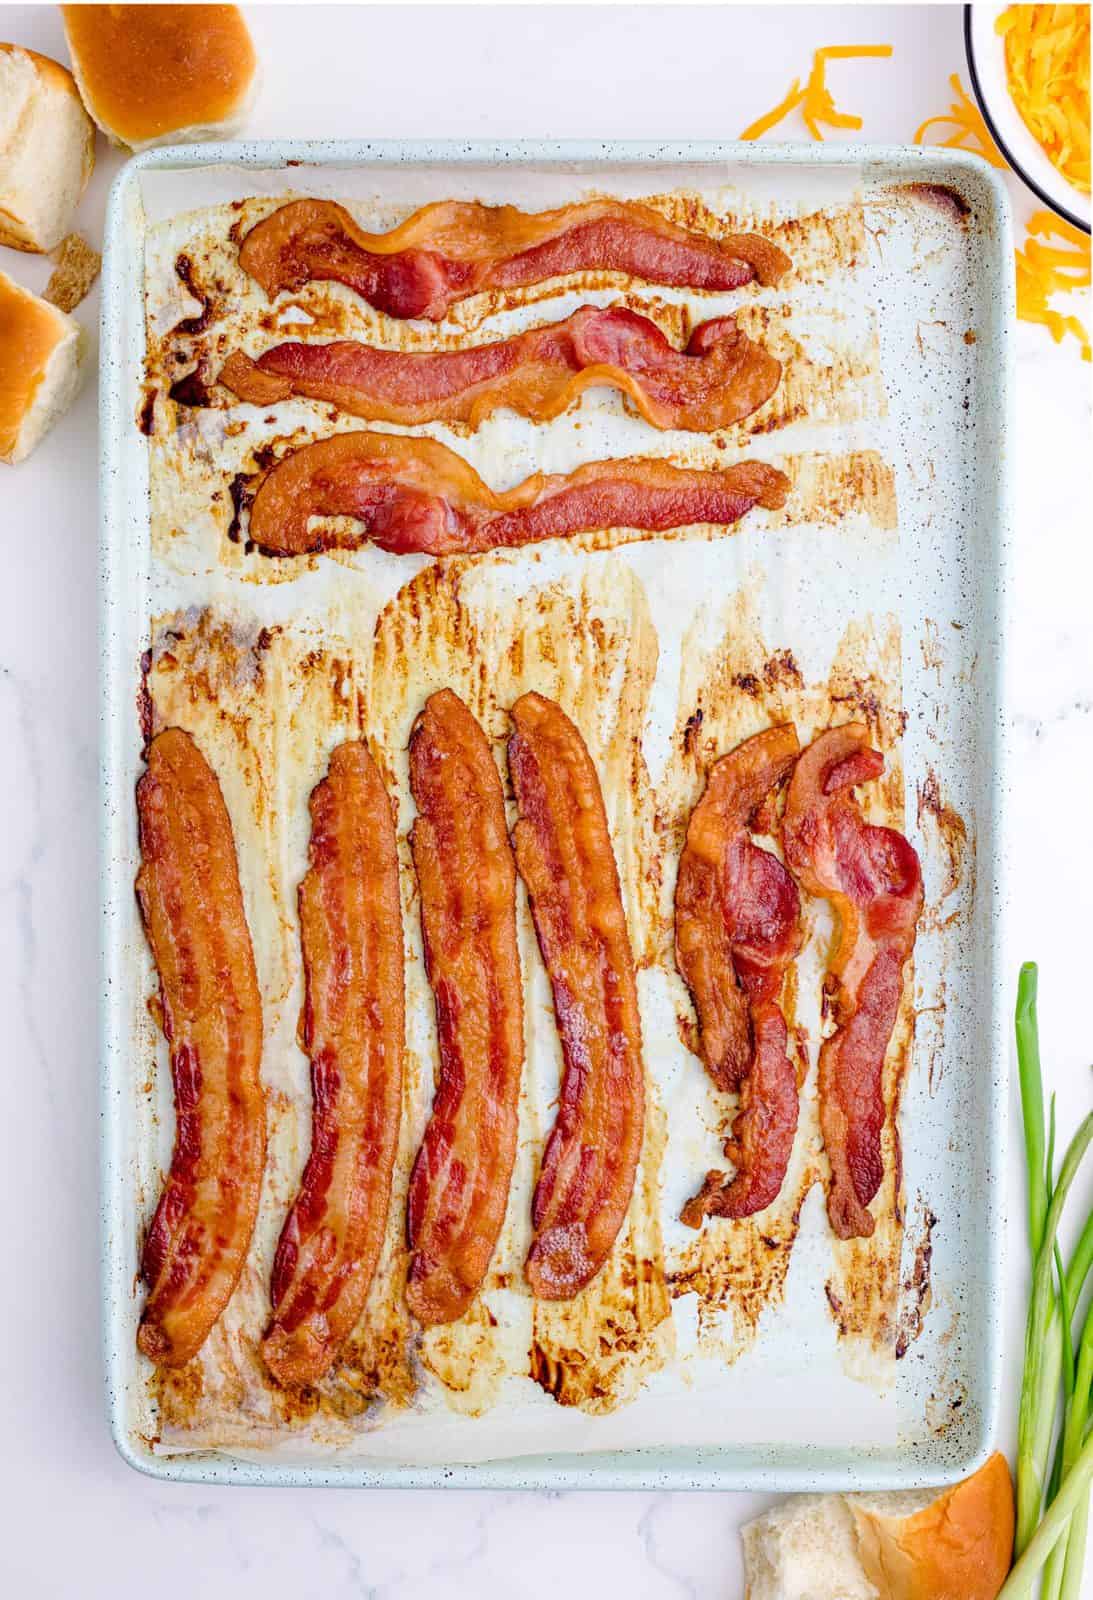 Cooked bacon on baking sheet.